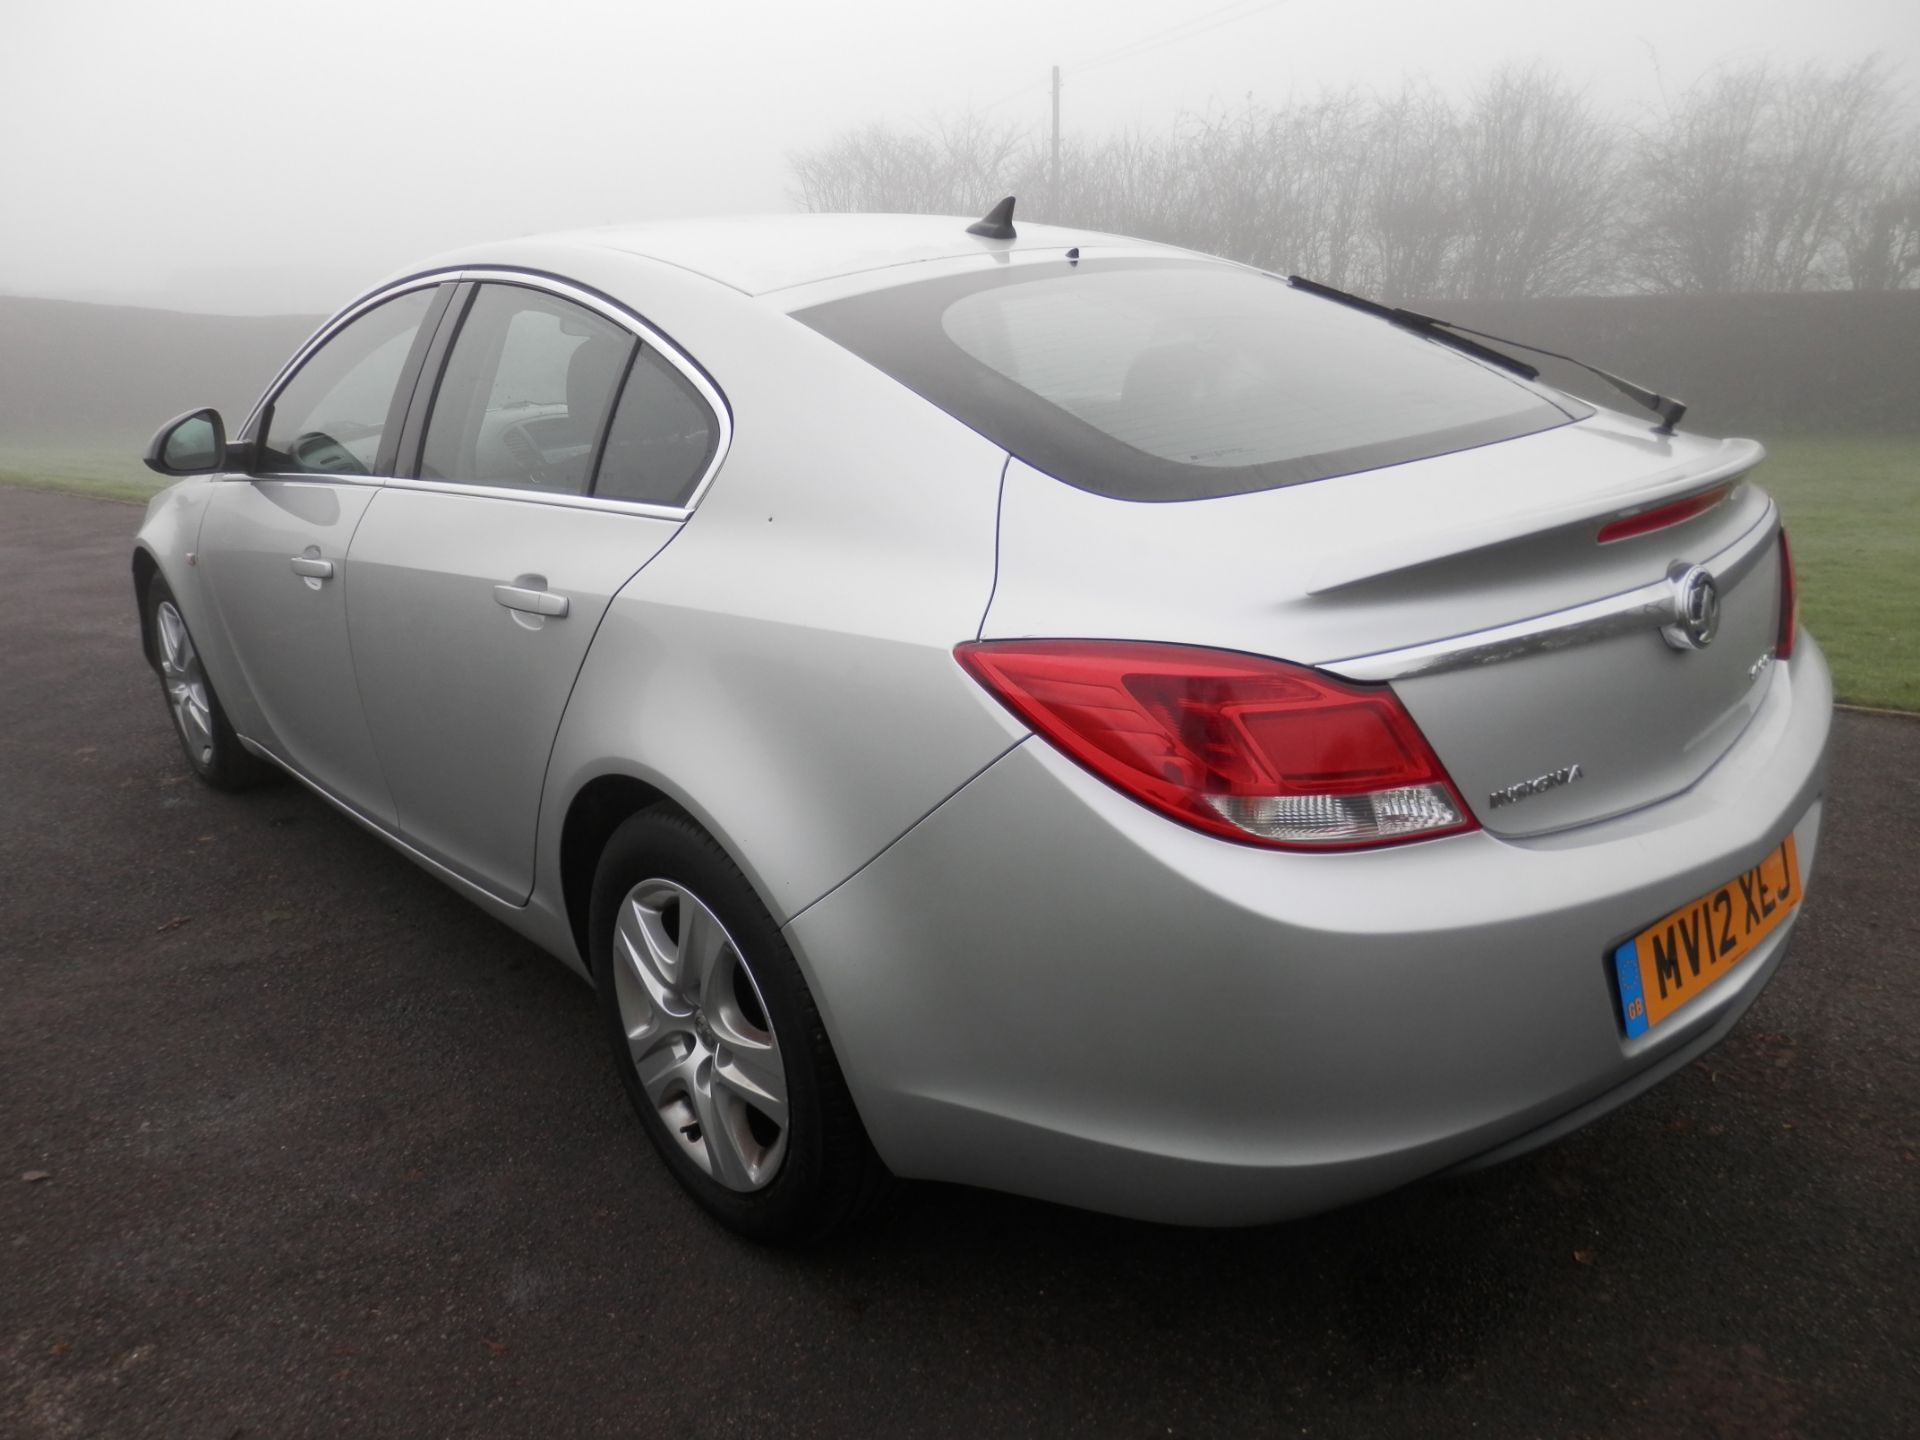 2012/12 VAUXHALL INSIGNIA EXCLUSIVE 2.0 TURBO DIESEL, MOT MARCH 2017, 6 SPEED MANUAL. - Image 5 of 16